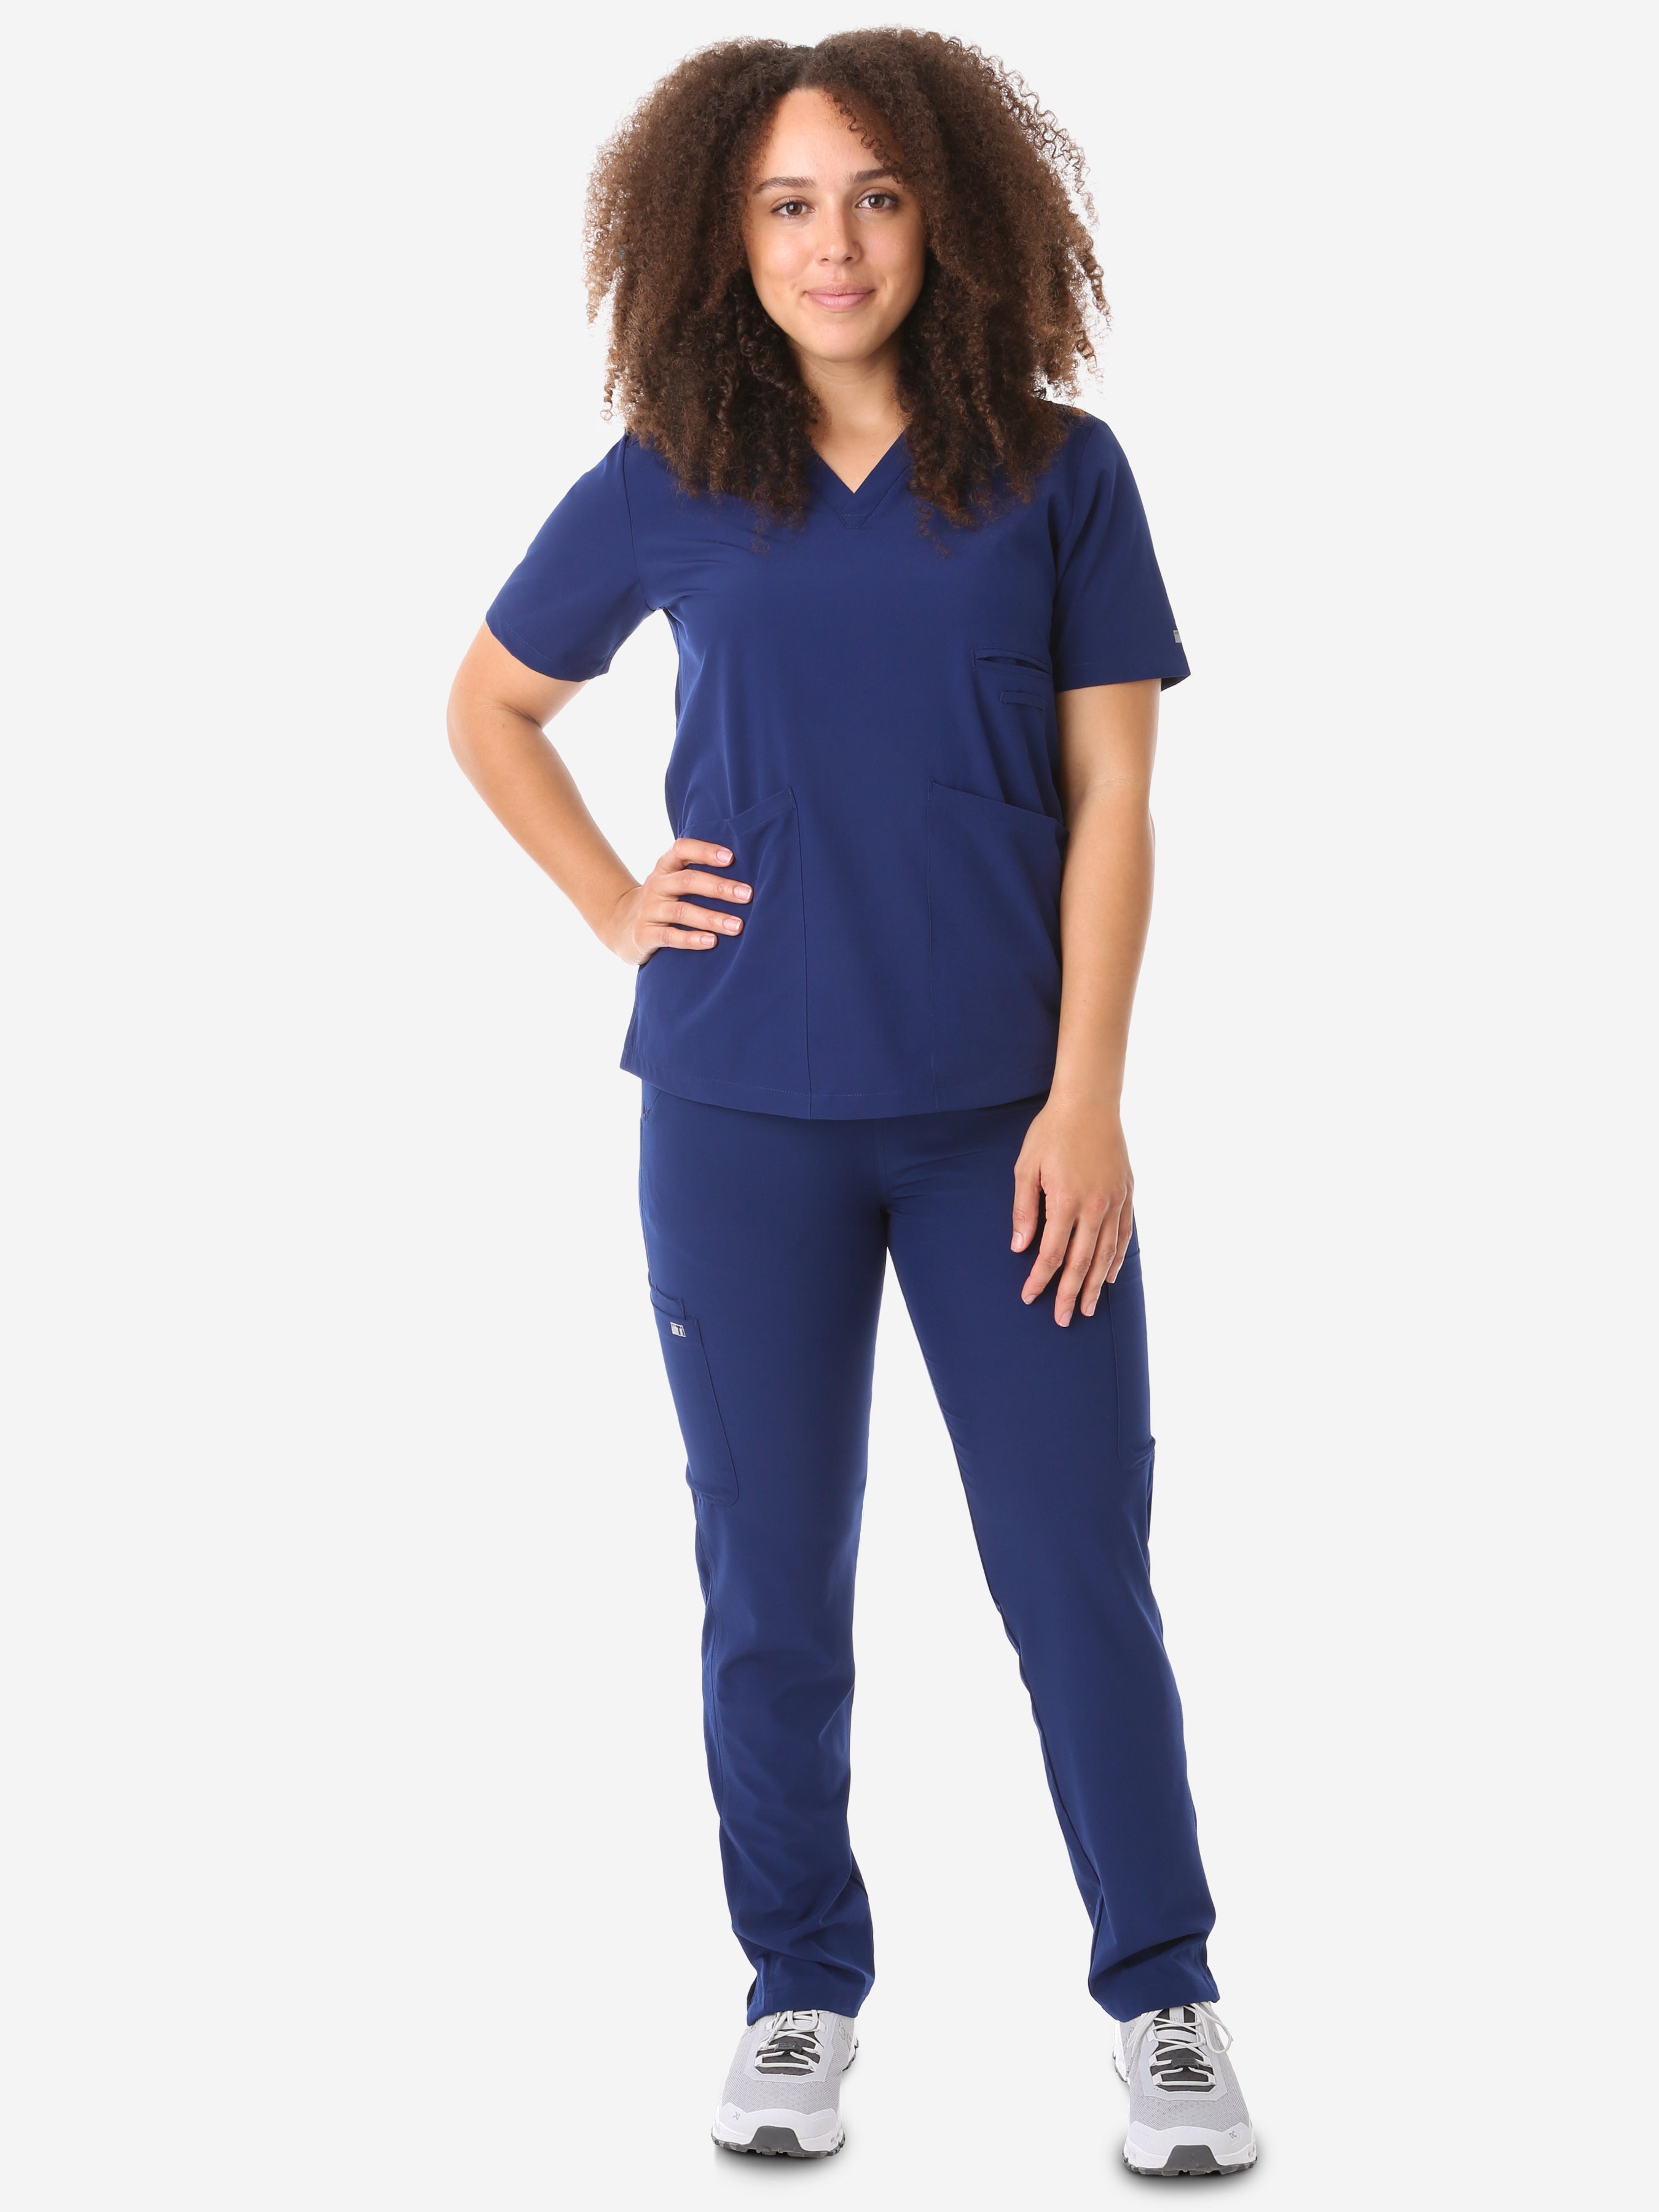 Women&#39;s Four-Pocket Scrub Top Navy Blue Full Body Front View with 9-Pocket Pants